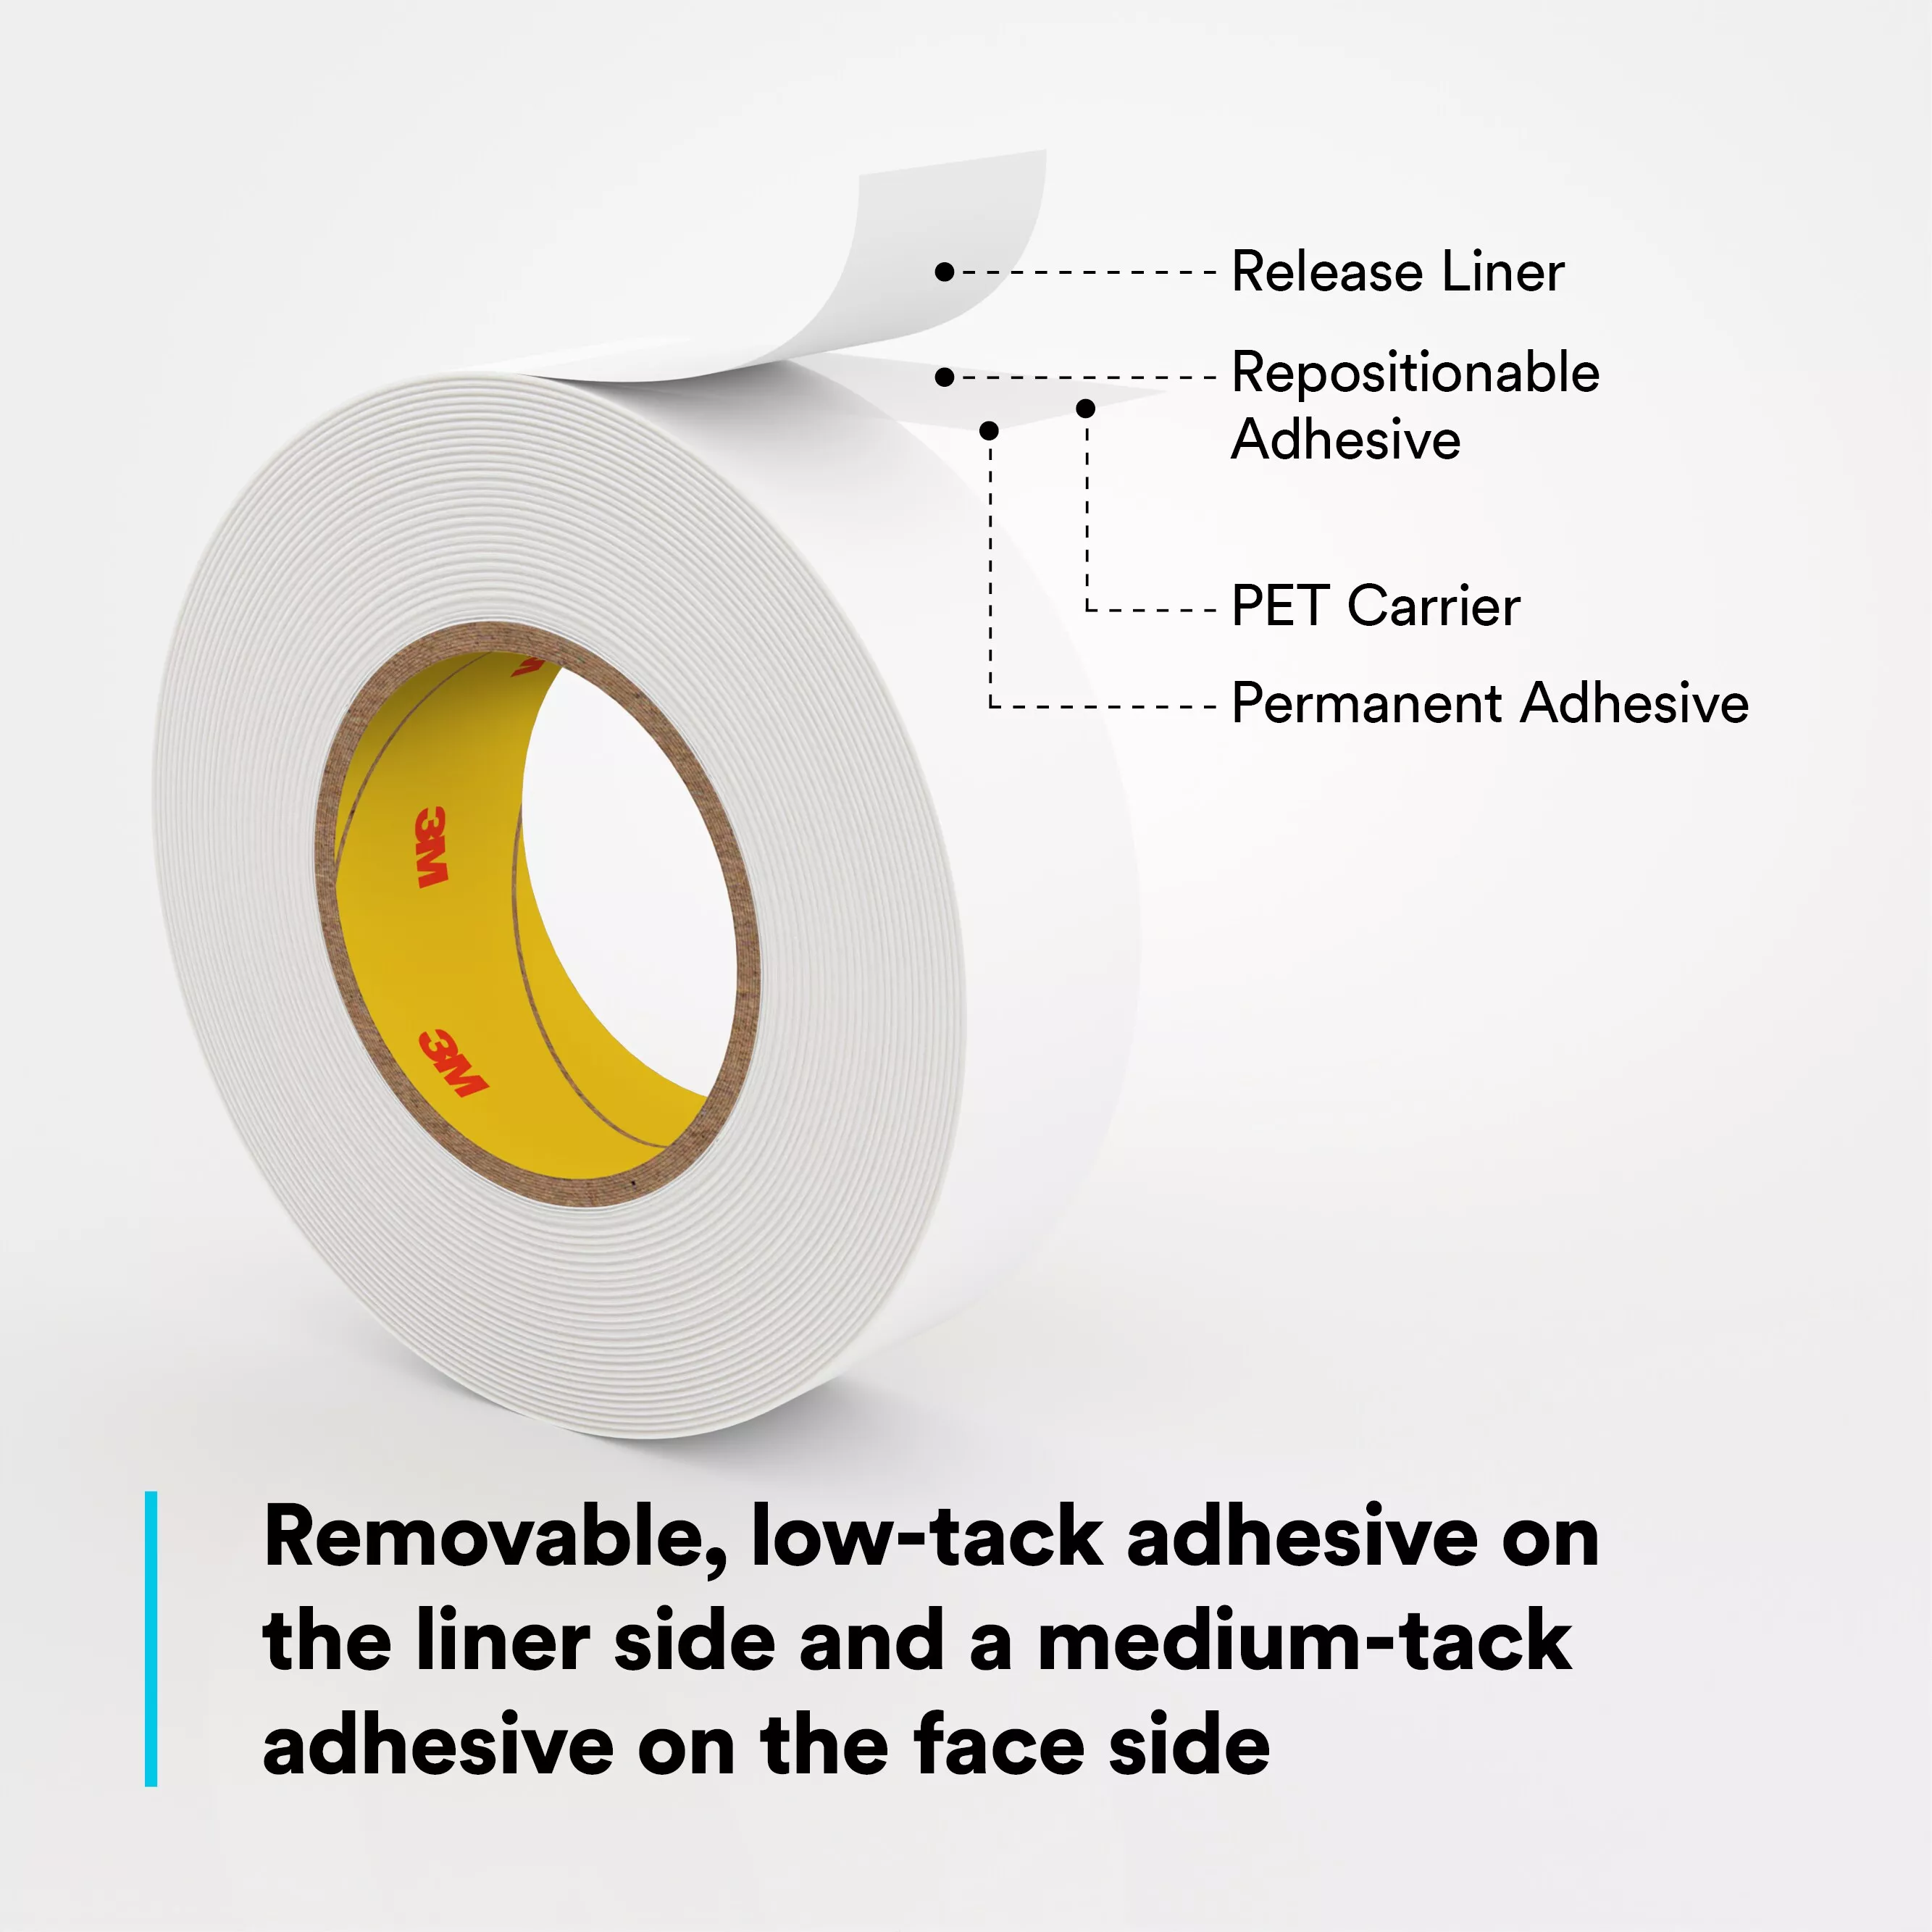 SKU 7000048889 | 3M™ Removable Repositionable Tape 9415PC